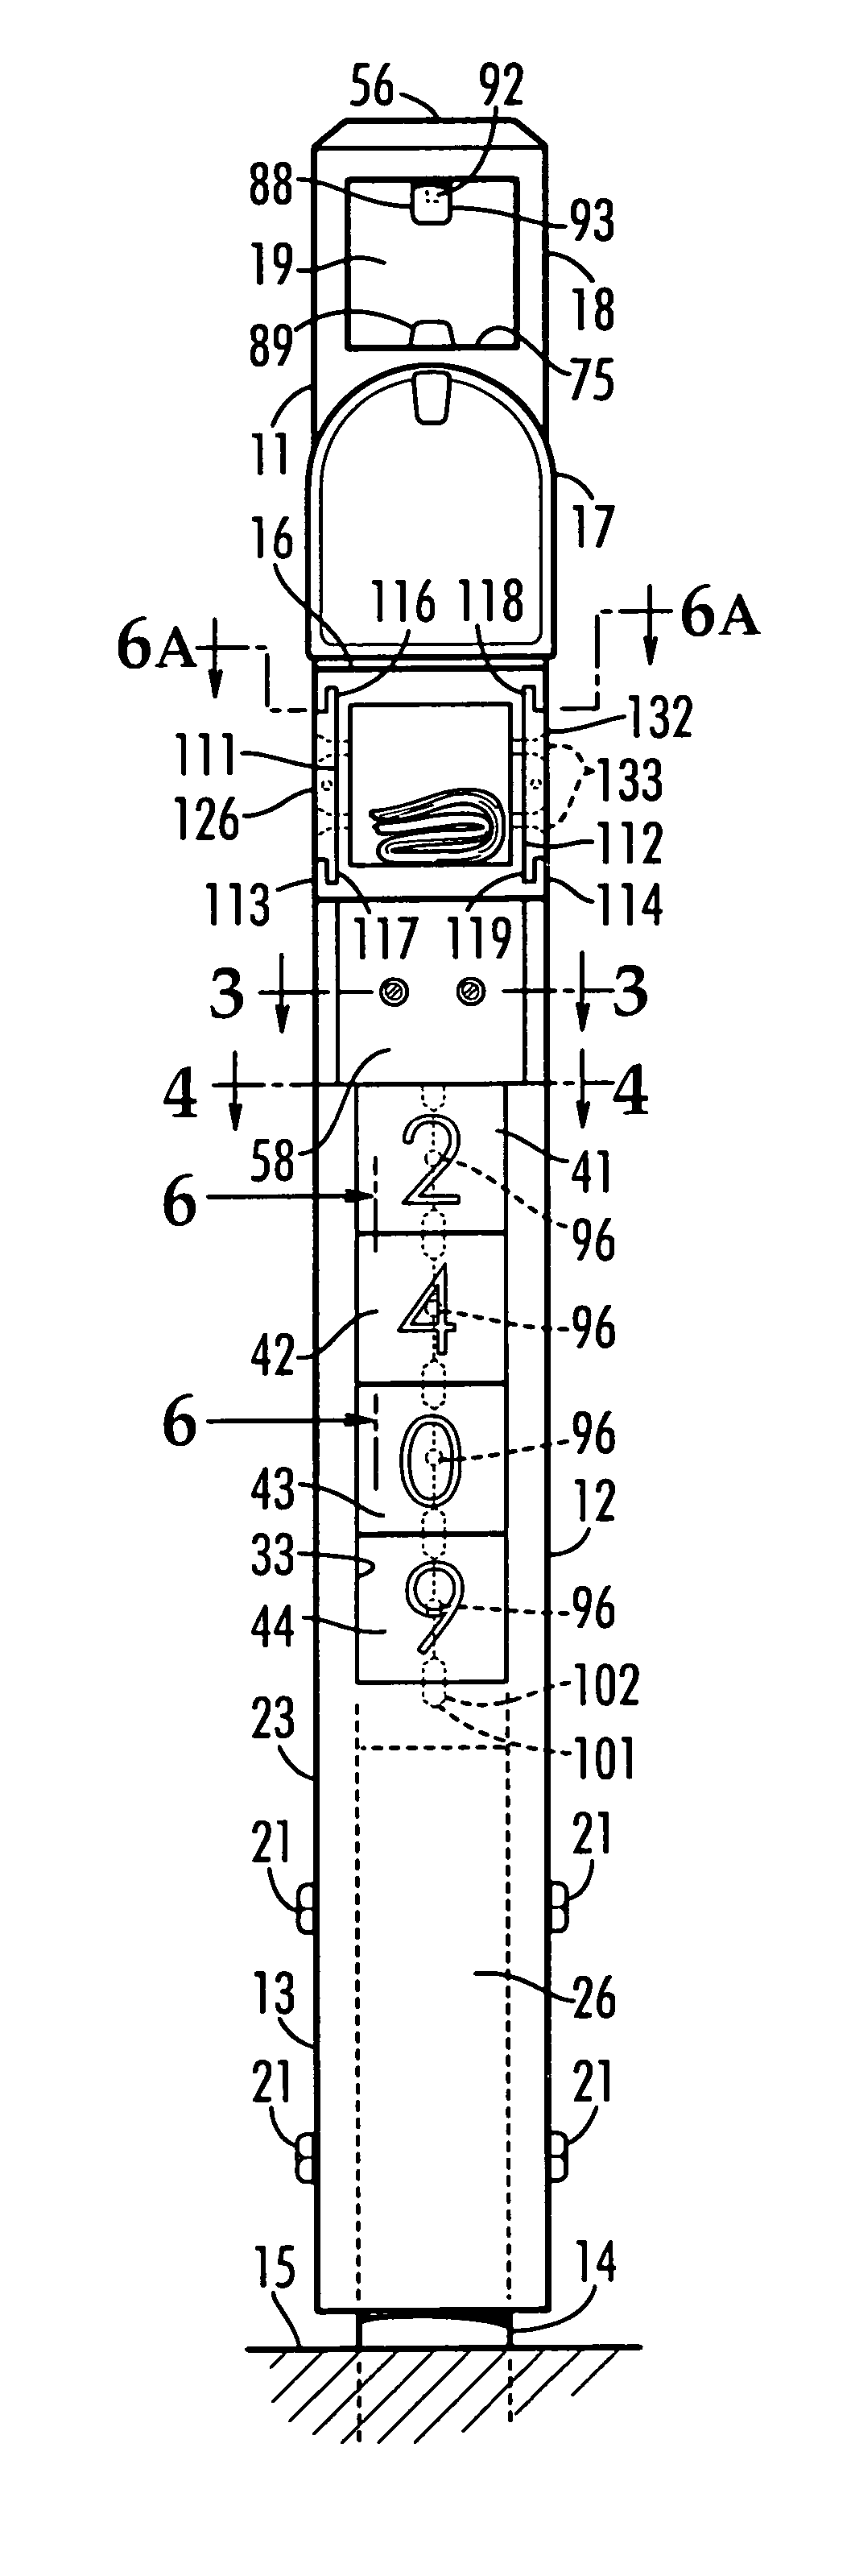 Mailbox support with lighted residence identification and alert signal apparatus